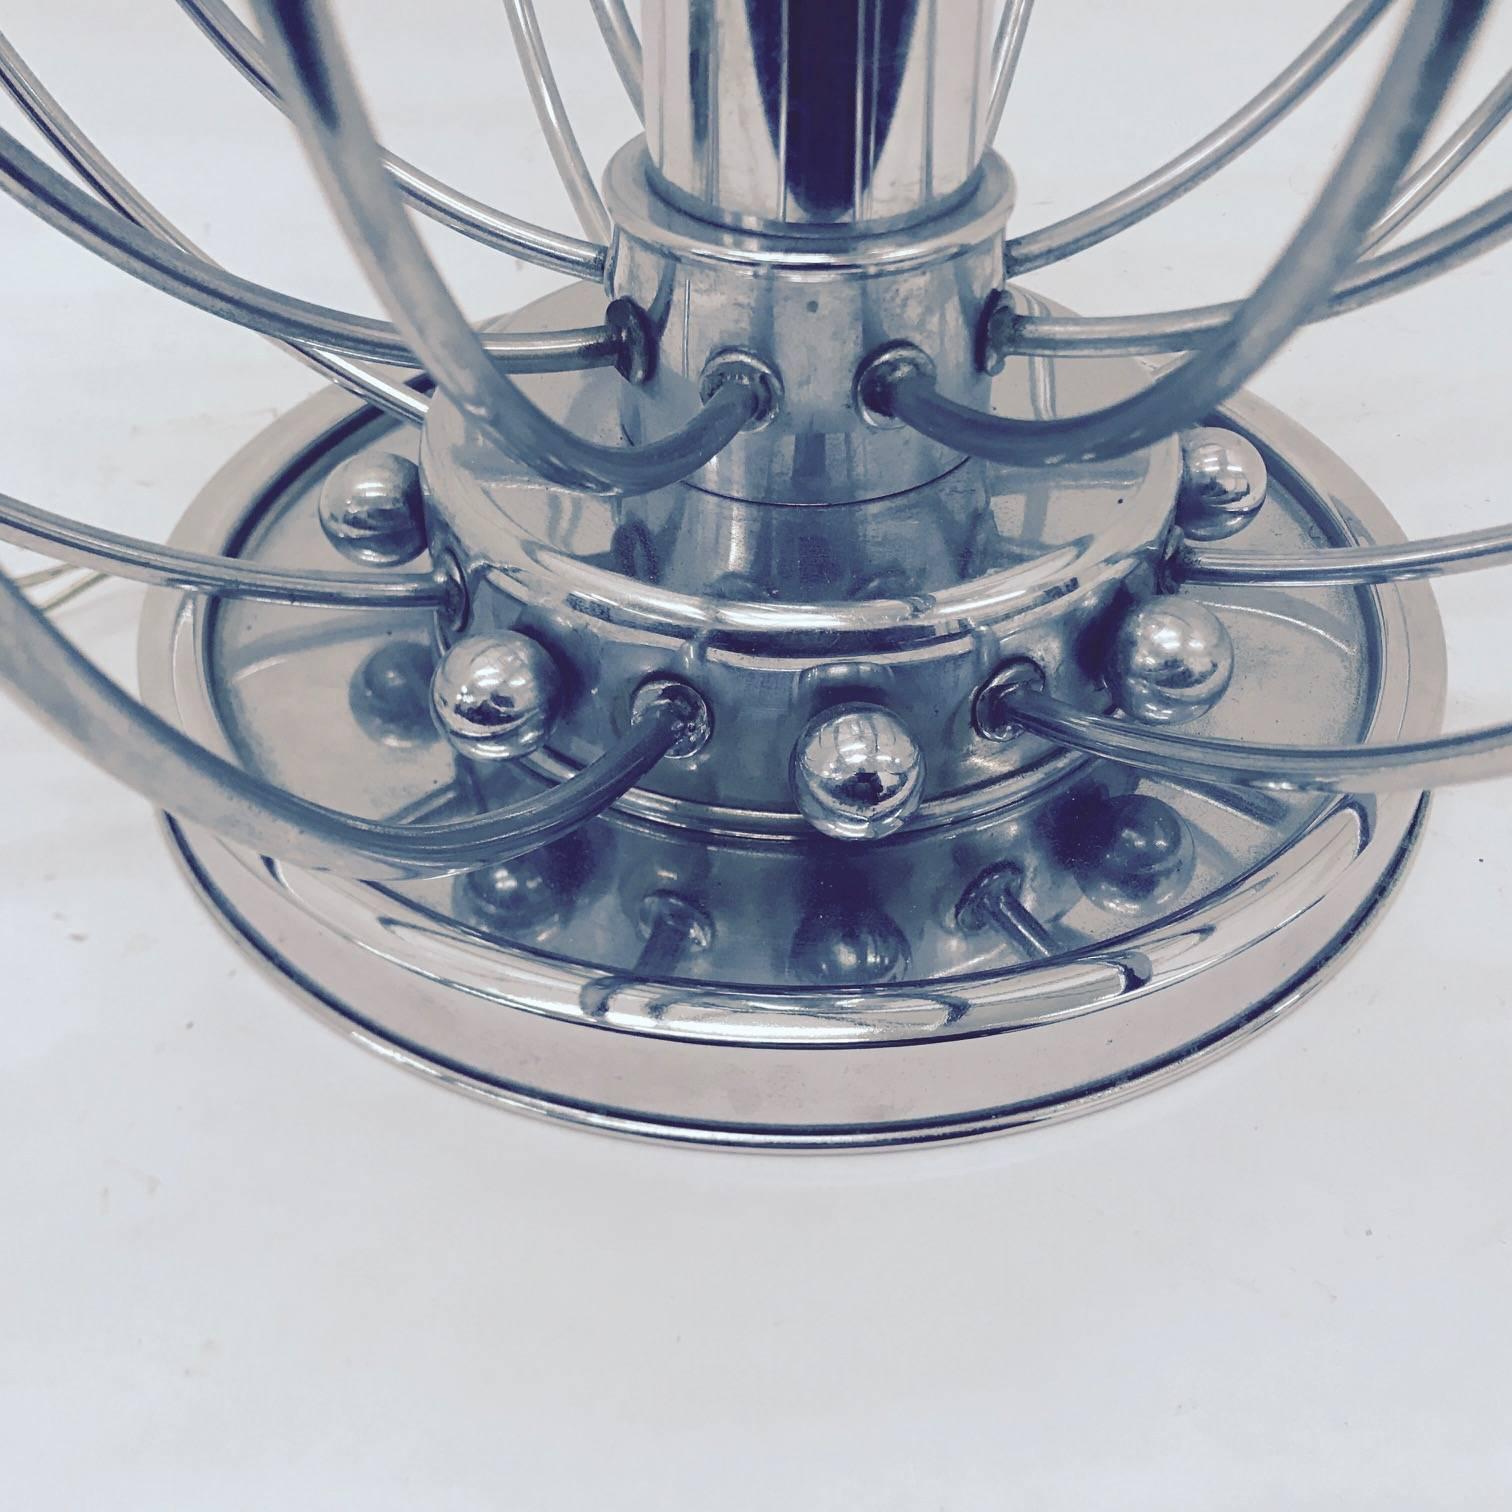 1970s Rare Space Age Chromed Italian Table Lamp in the style of Pistillo Lamp 2